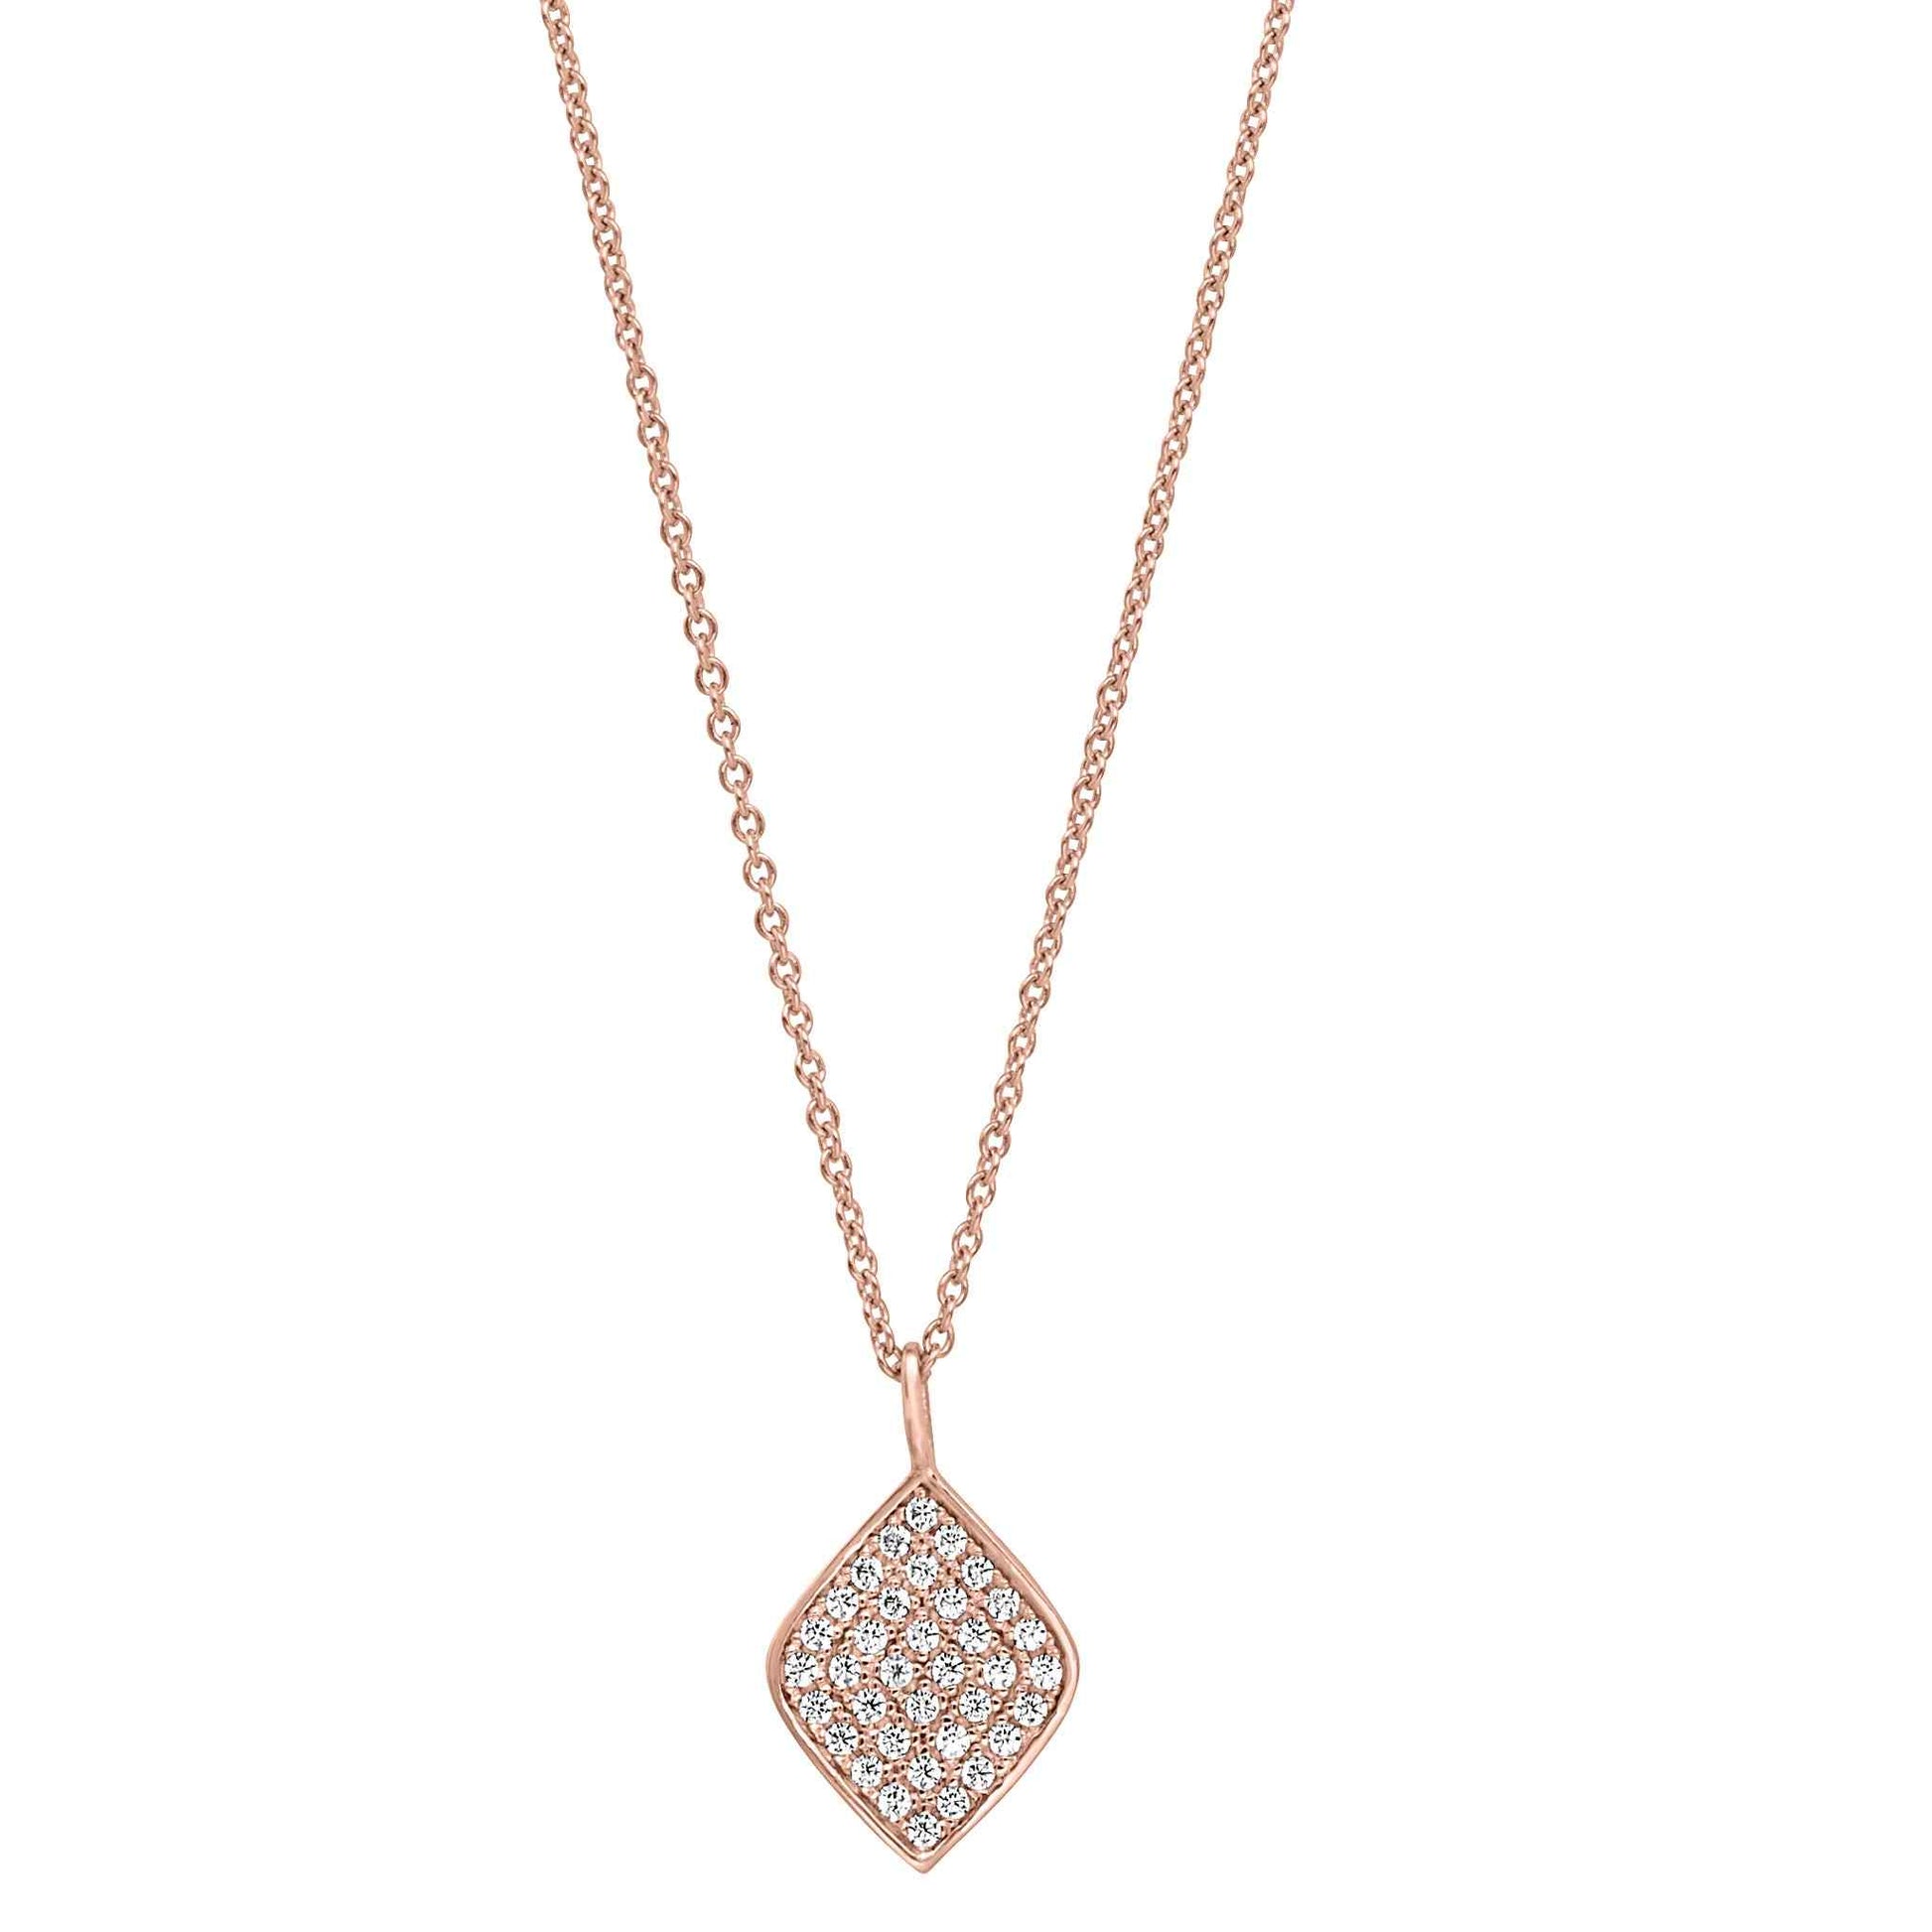 A sterling silver diamond shaped necklace with simulated diamonds displayed on a neutral white background.